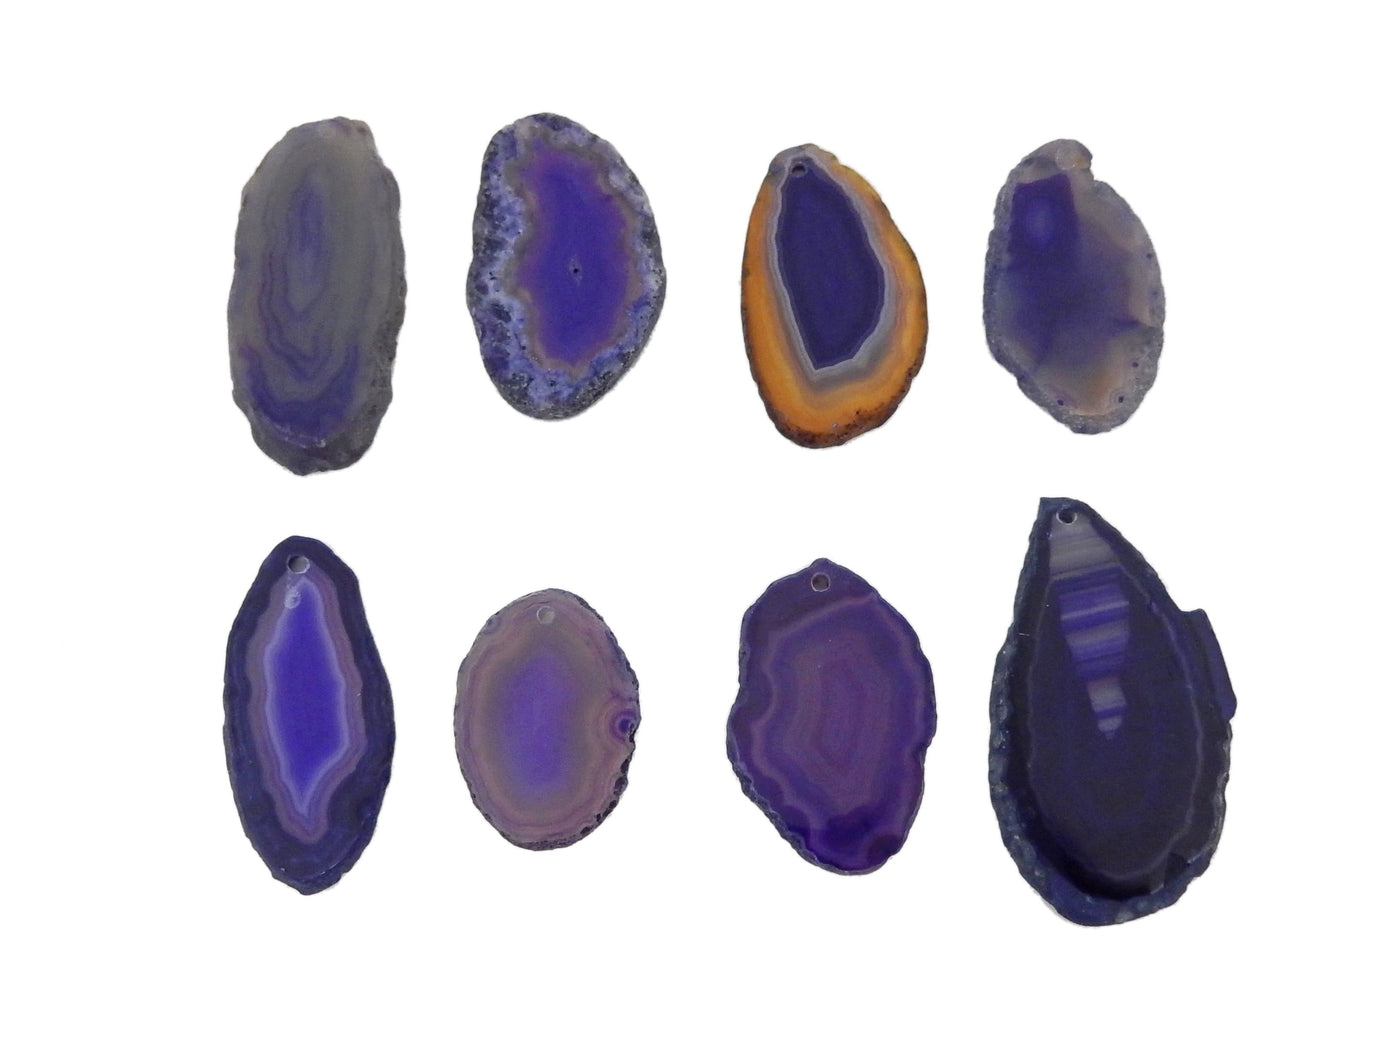 8 Purple Agate Slices Drilled on White Background.